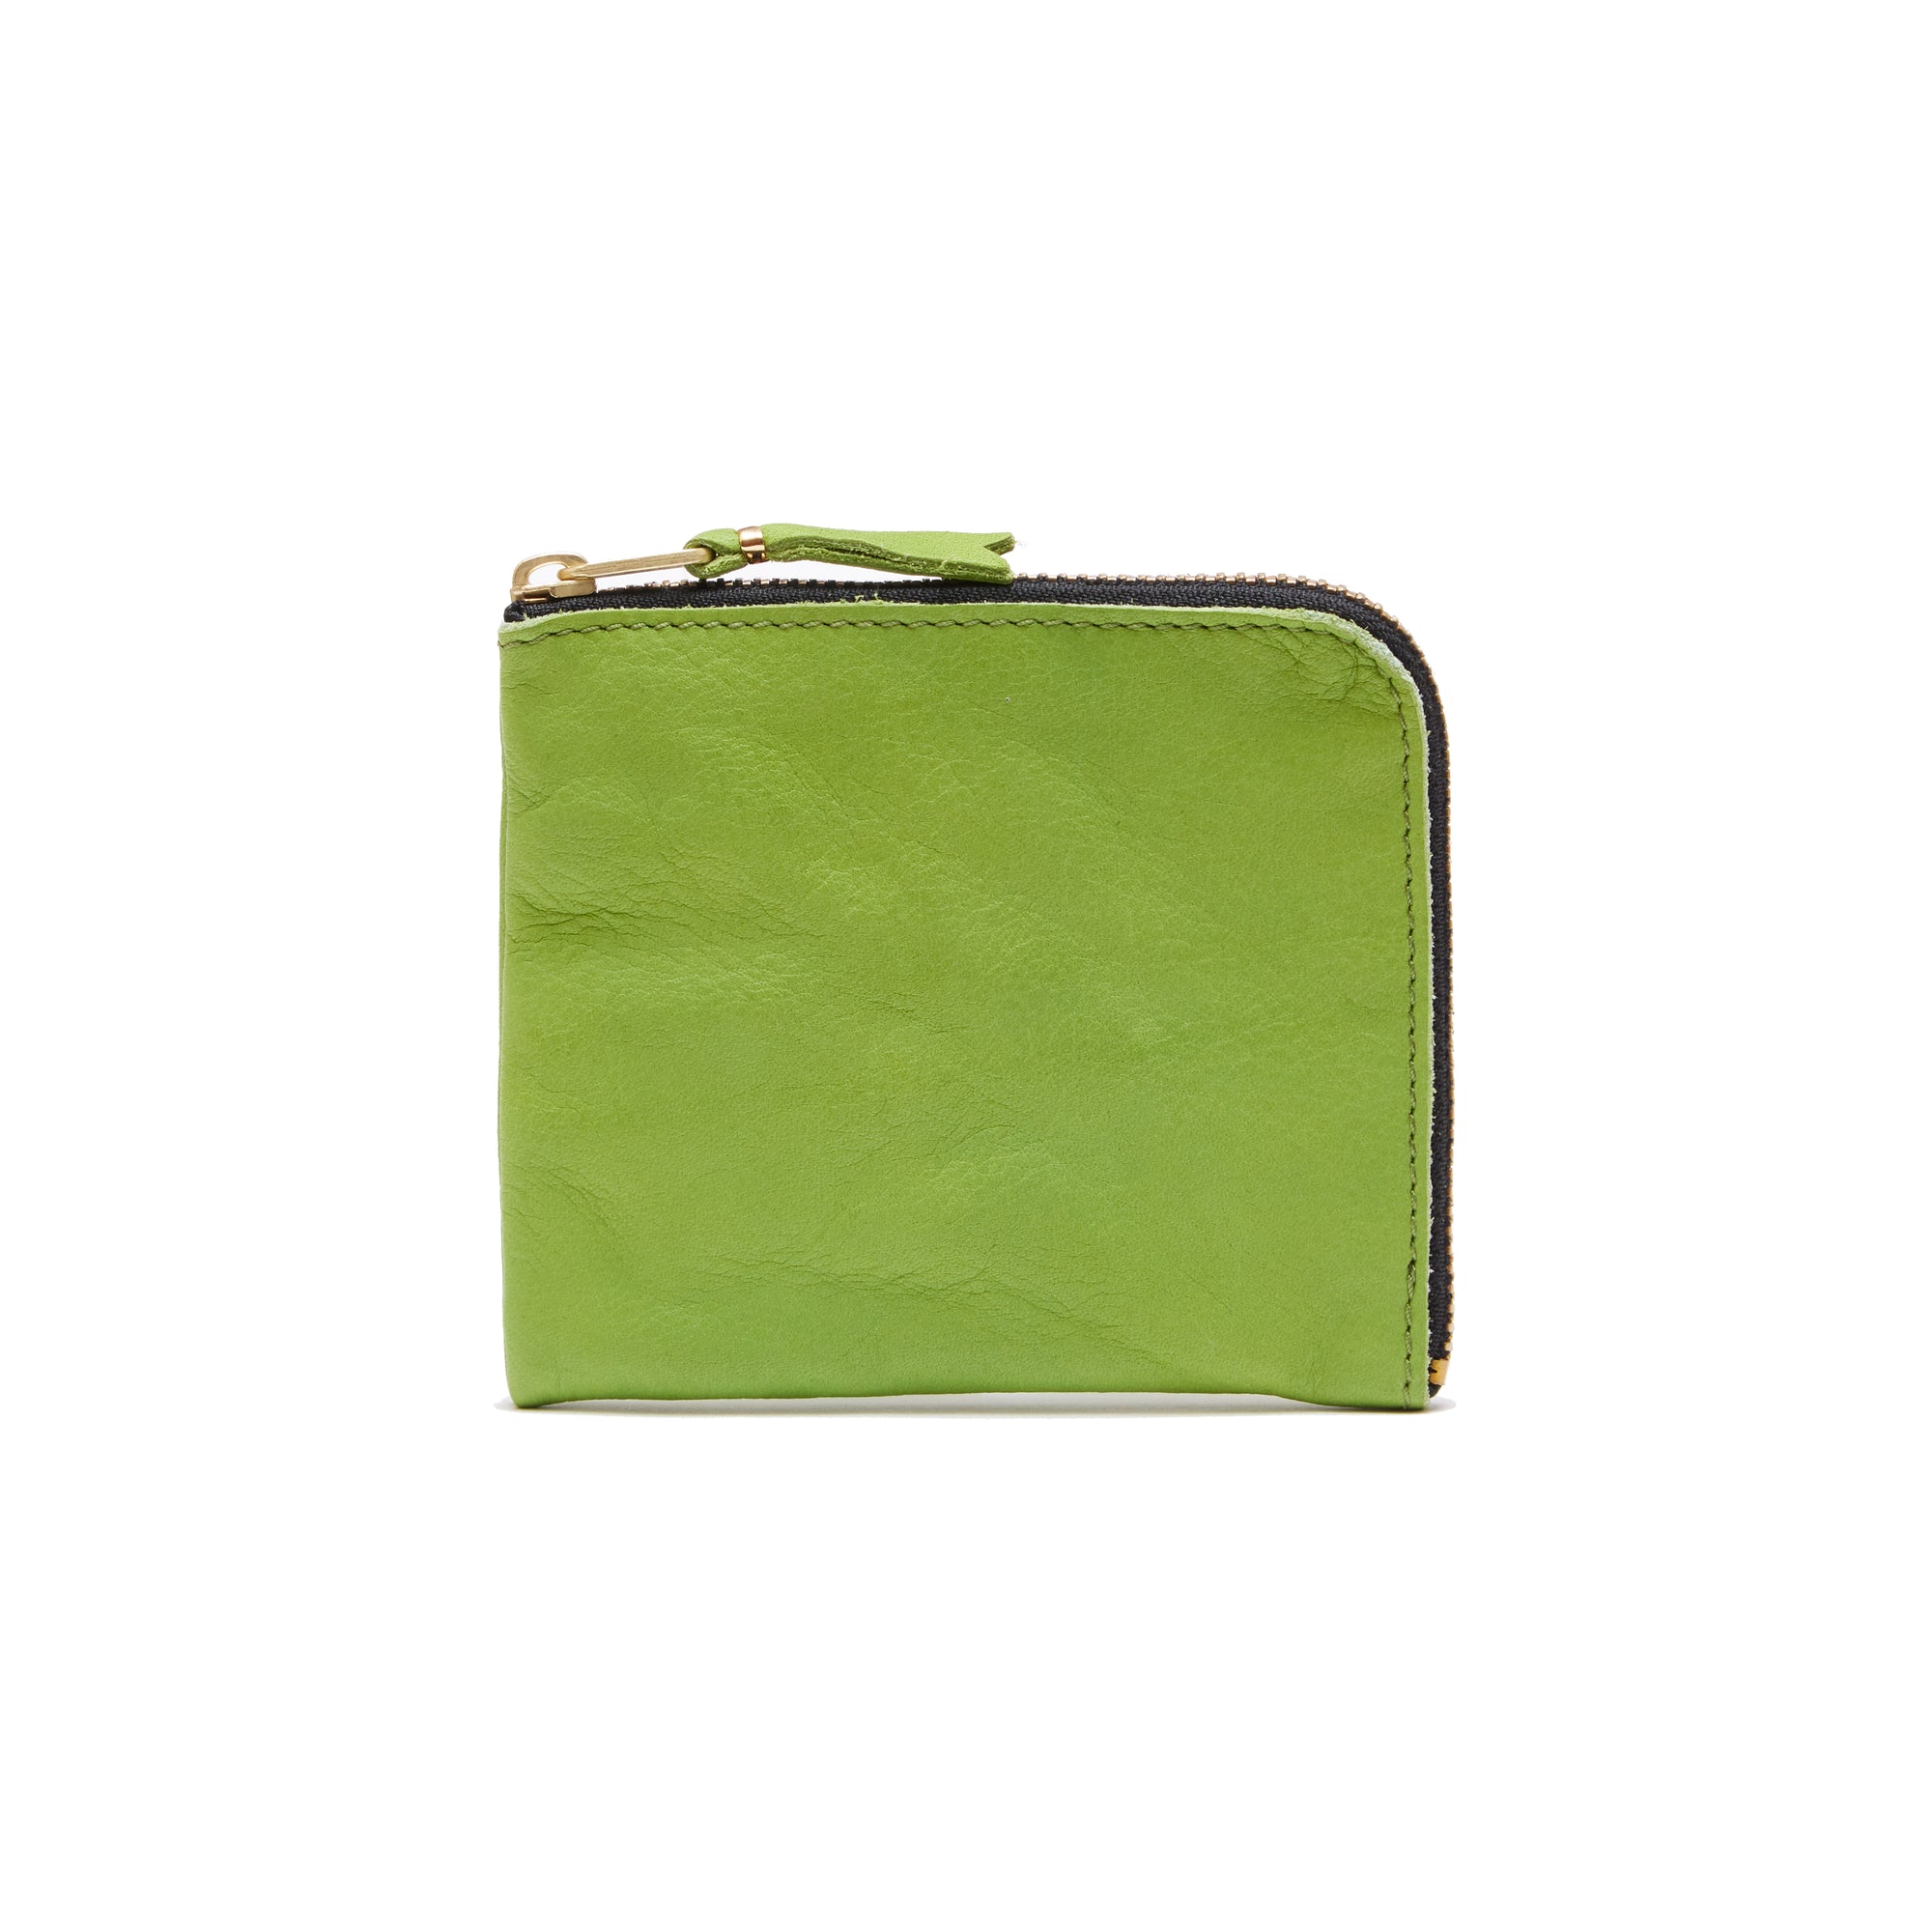 CDG WALLET - Washed Wallet - (8Z-Y031 Green) view 1